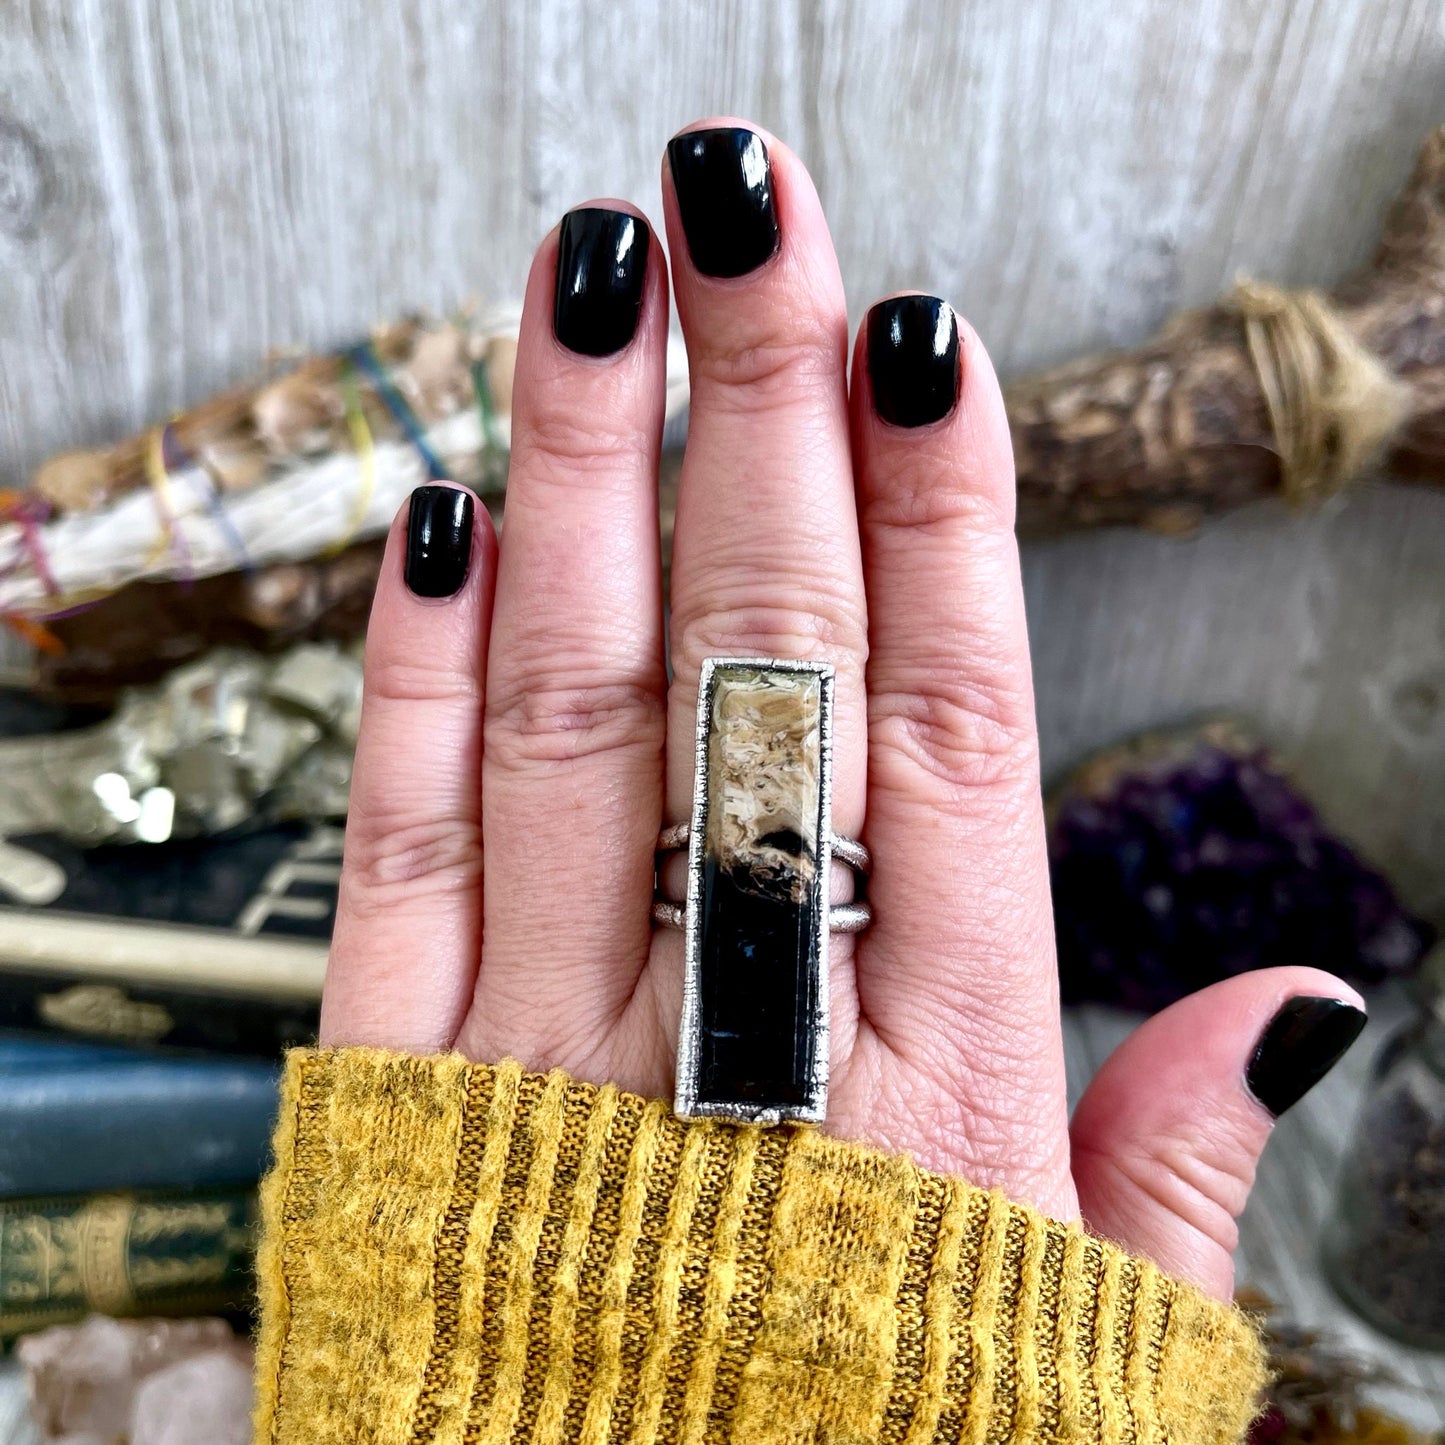 Big Bold Jewelry, Big Crystal Ring, Big Silver Ring, Big Stone Ring, Etsy ID: 1315703140, Fossilized Palm Root, FOXLARK- RINGS, Jewelry, Large Boho Ring, Large Crystal Ring, Large Stone Ring, Natural stone ring, Rings, silver crystal ring, Silver Stone Je